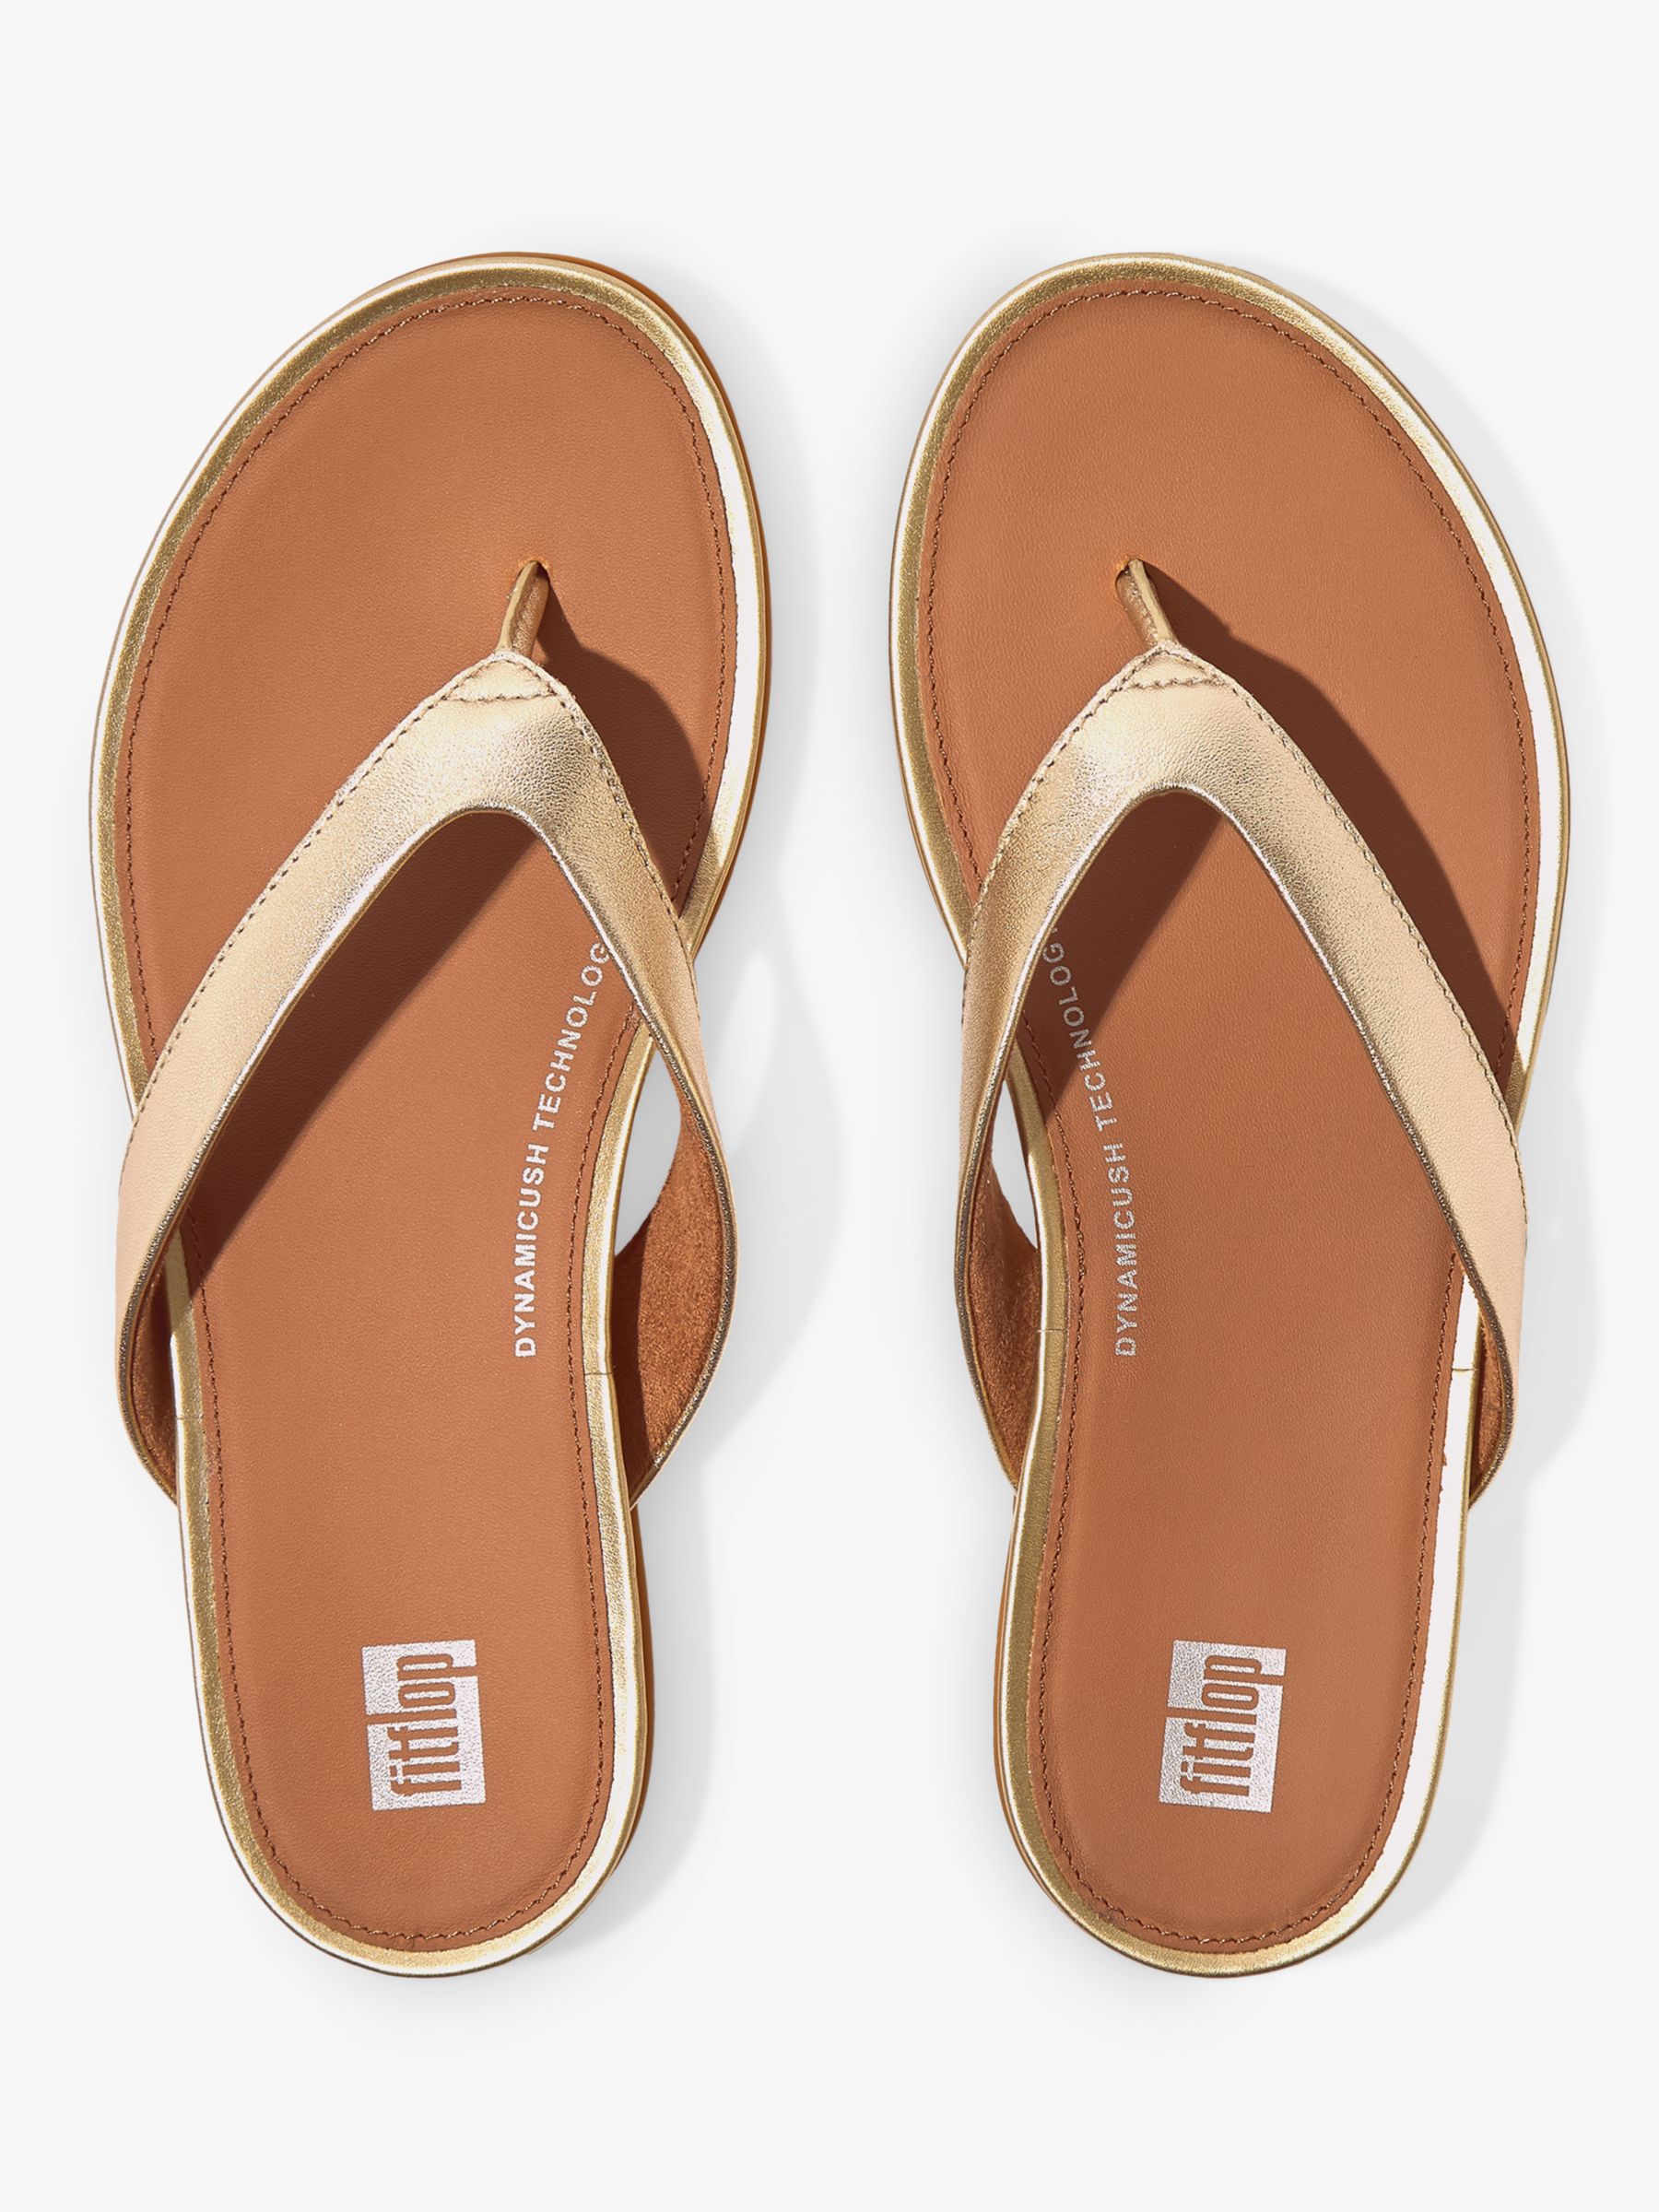 FitFlop Gracie Leather Flip Flops, Platino at John Lewis & Partners